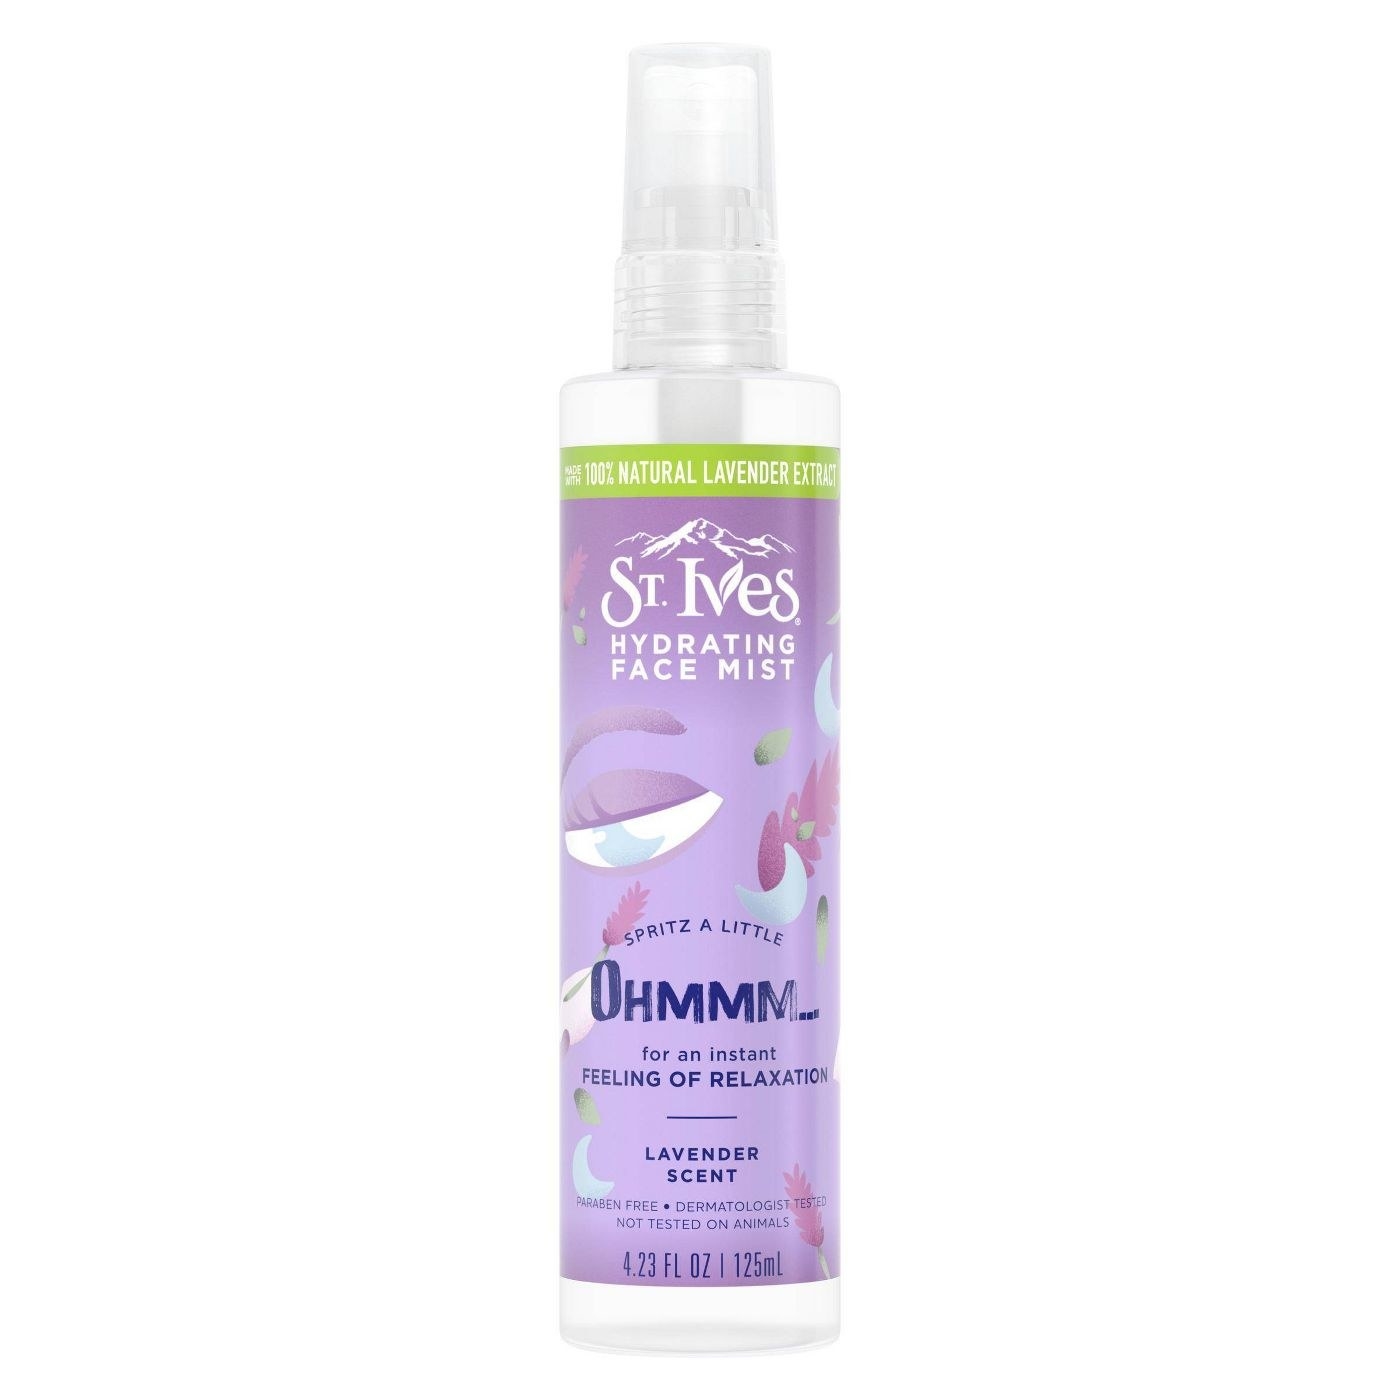 The St. Ives hydrating lavender face mist